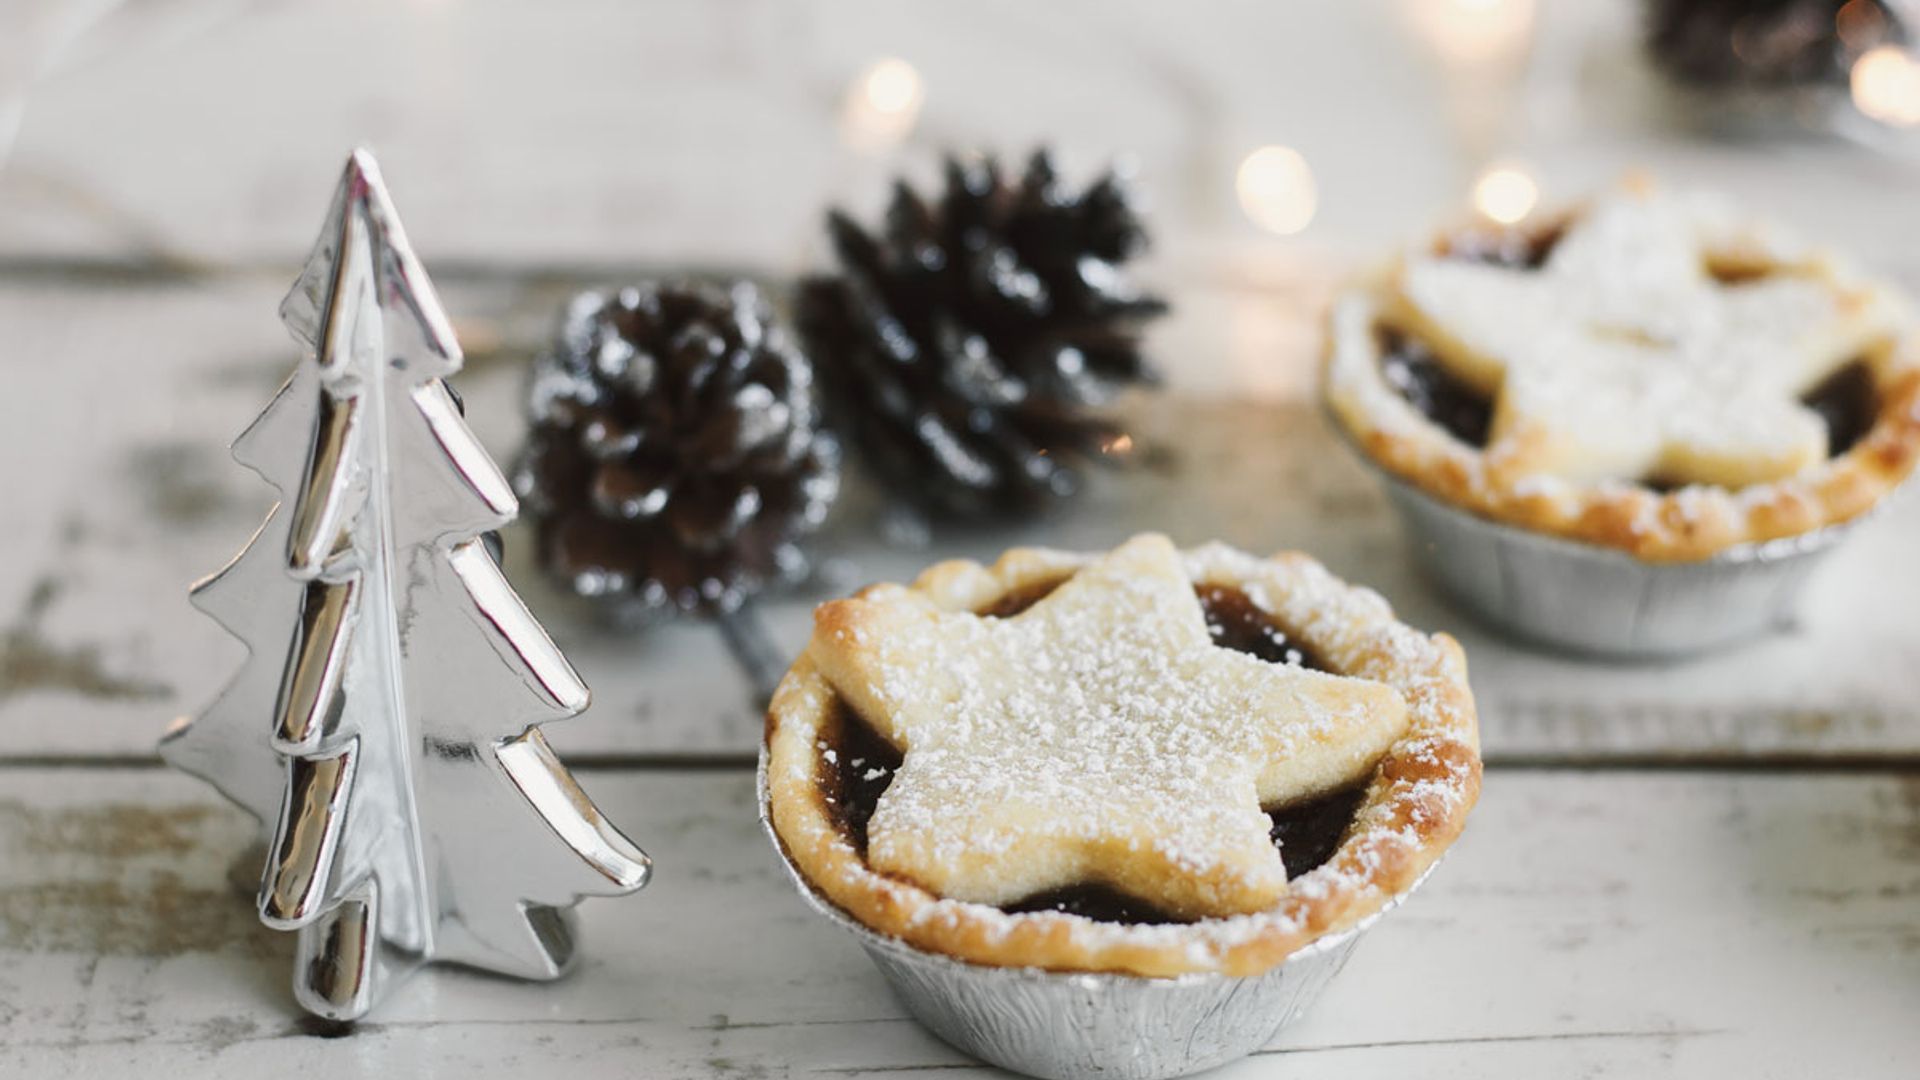 Calling all mince pie lovers! Selfridges has just dropped its mince pie